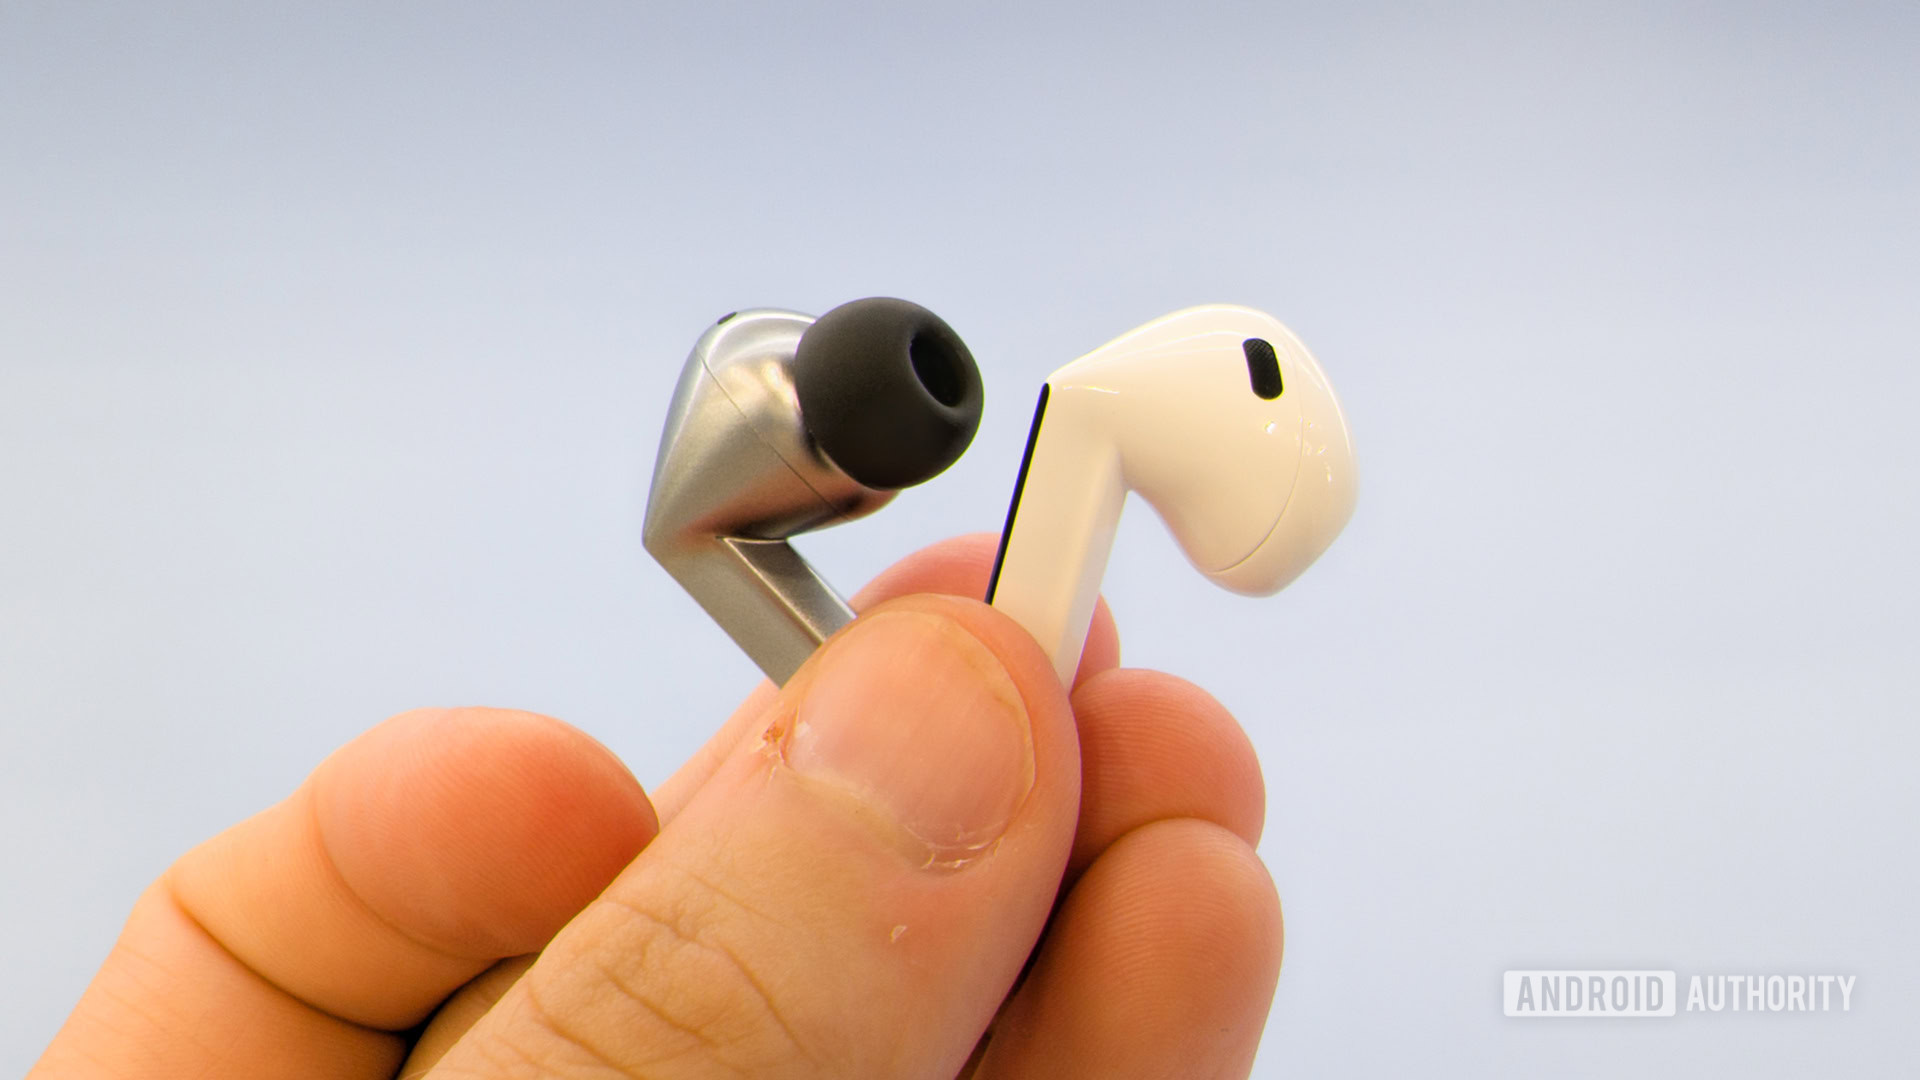 Here’s why sales of the Galaxy Buds 3 Pro were suspended